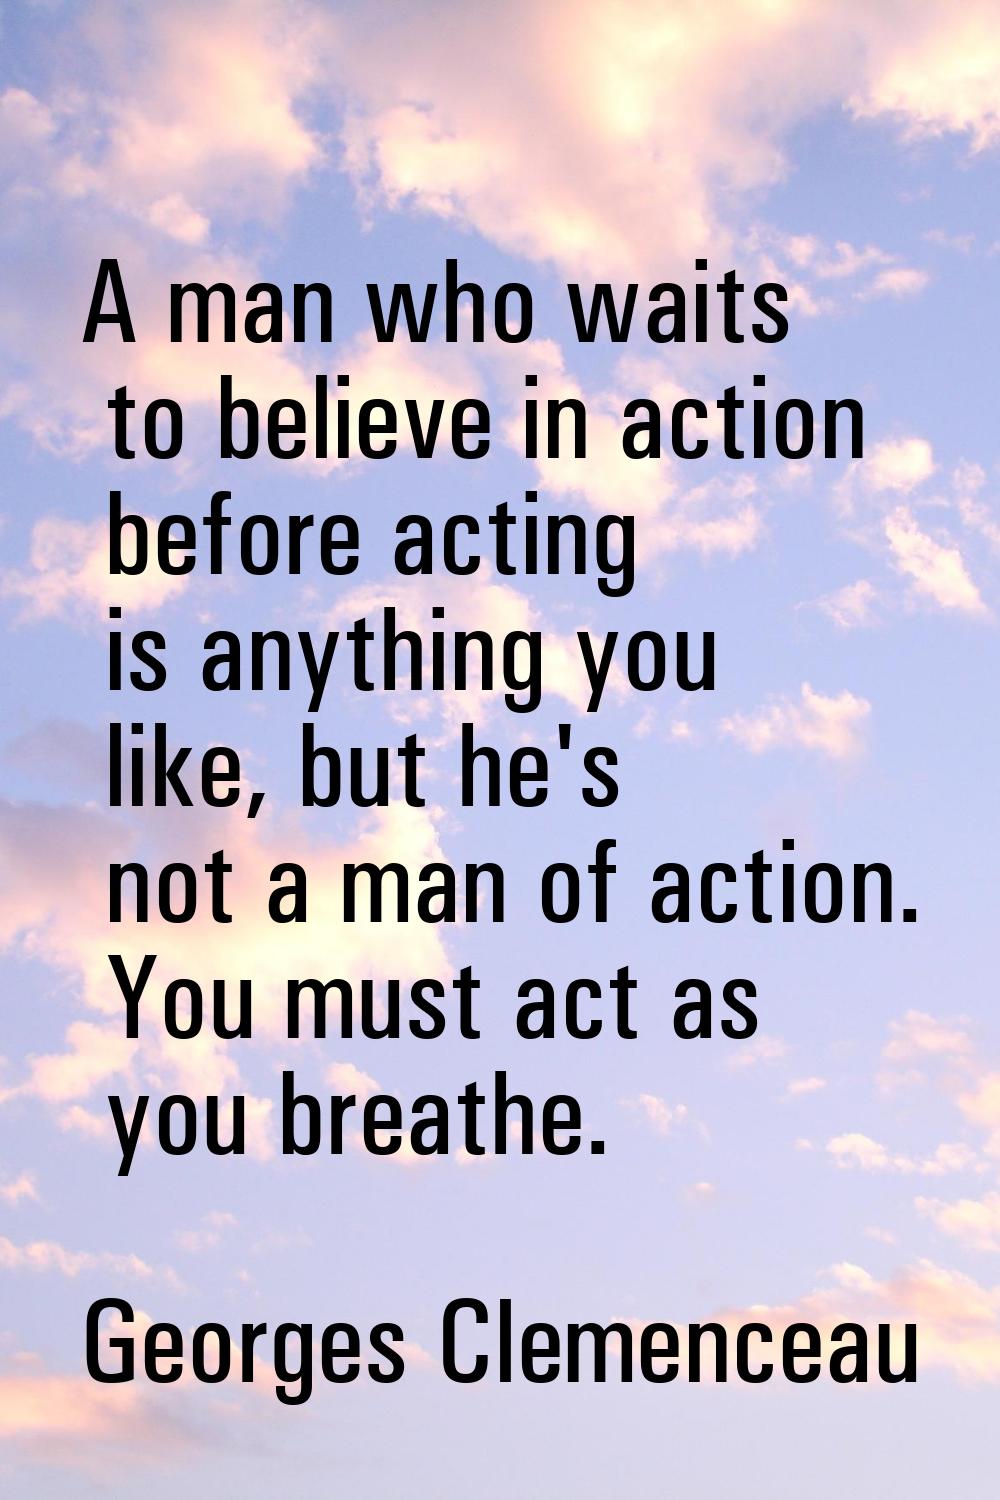 A man who waits to believe in action before acting is anything you like, but he's not a man of acti